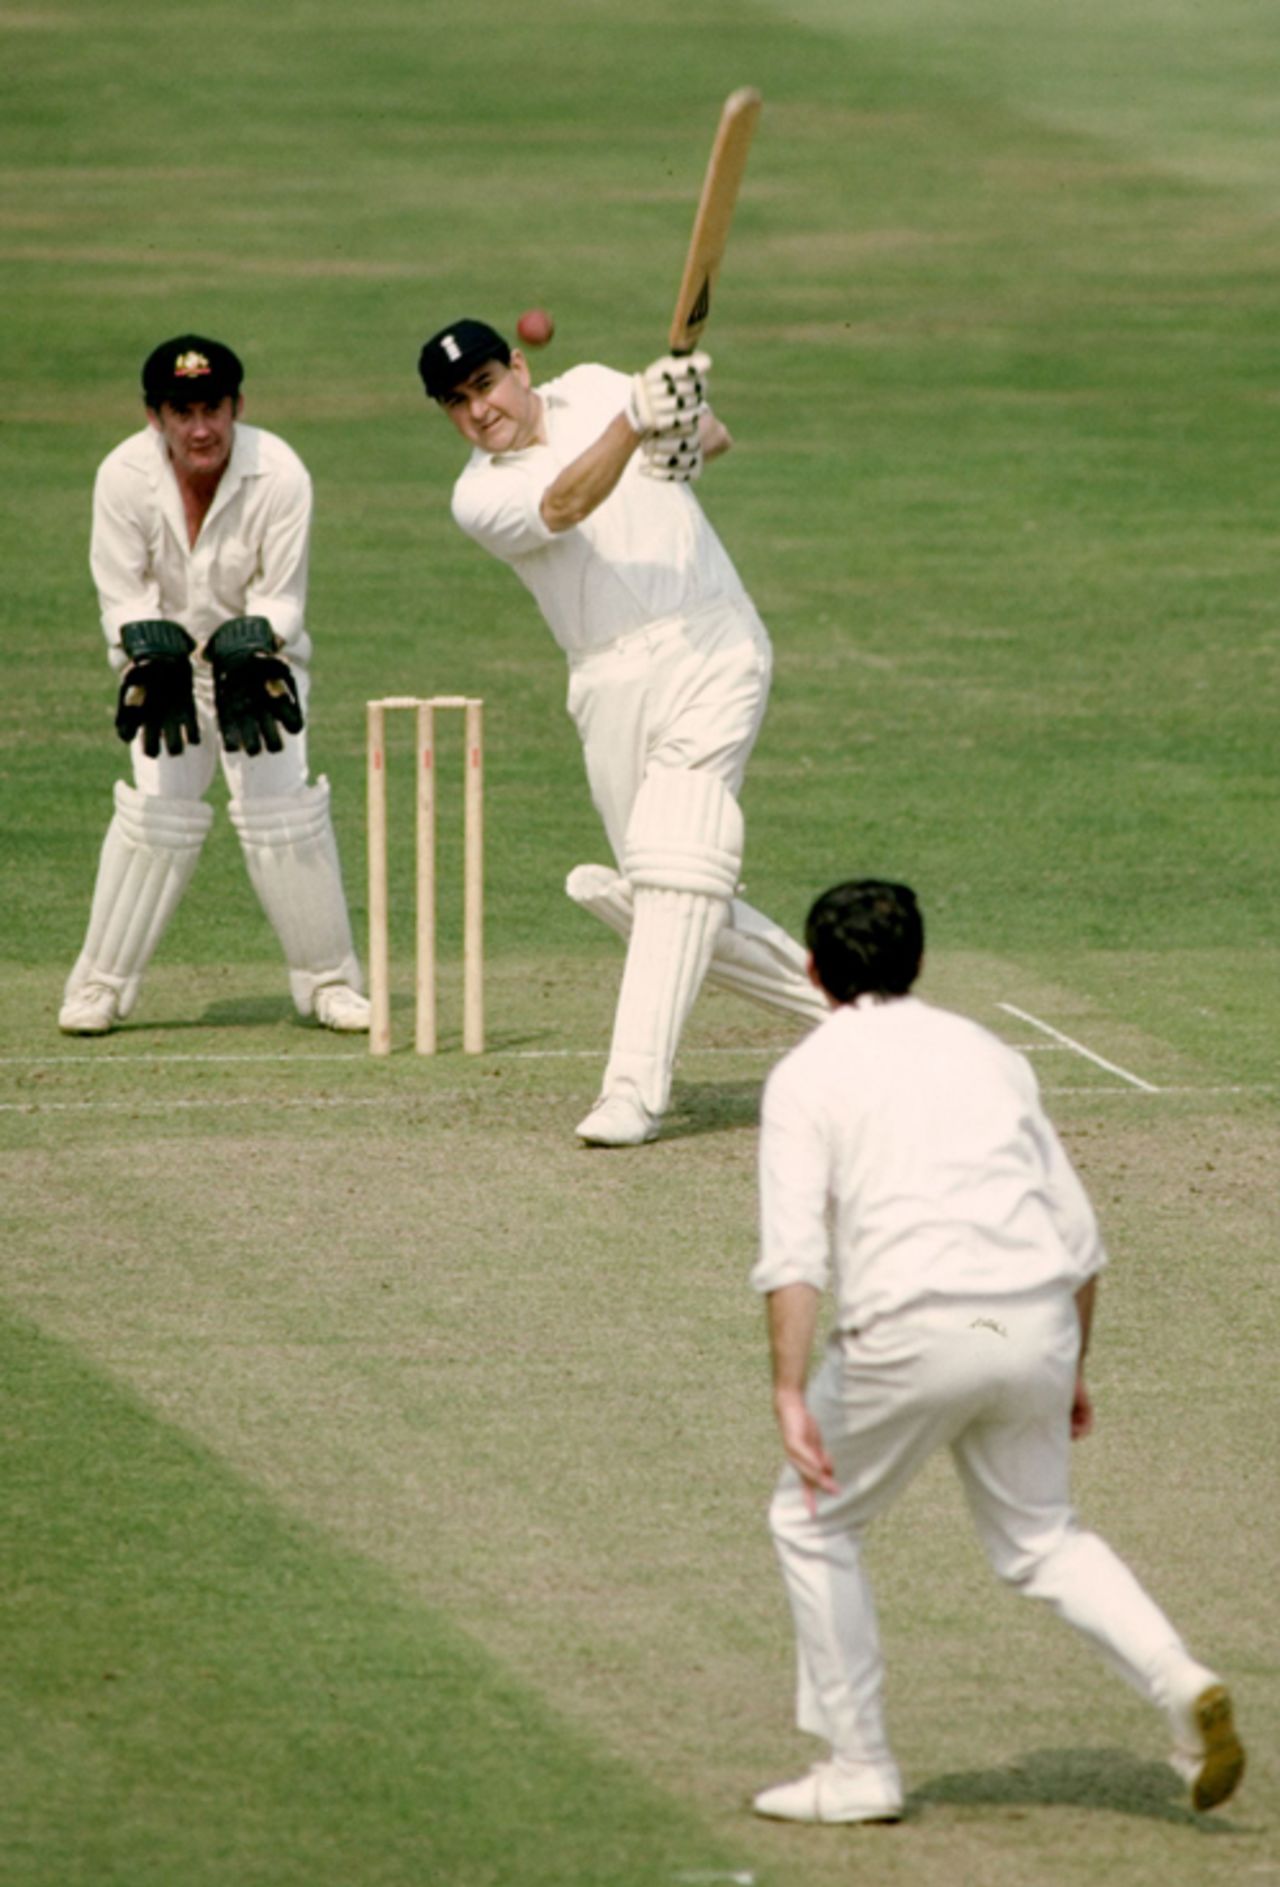 Colin Cowdrey batting for Old England against Old Australia at The Oval, August 20, 1980